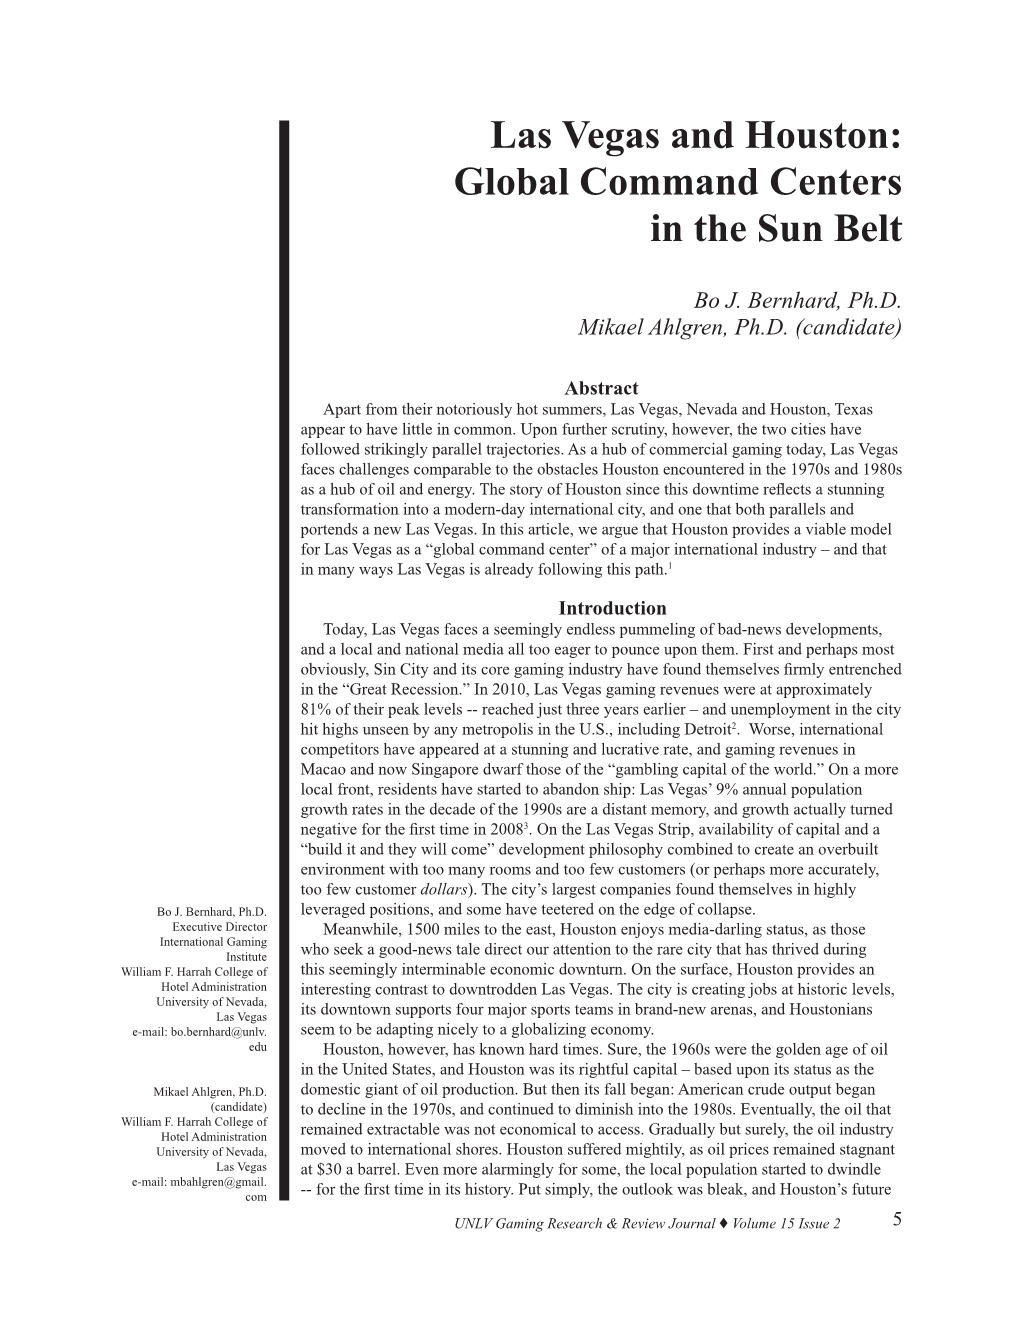 Las Vegas and Houston: Global Command Centers in the Sun Belt